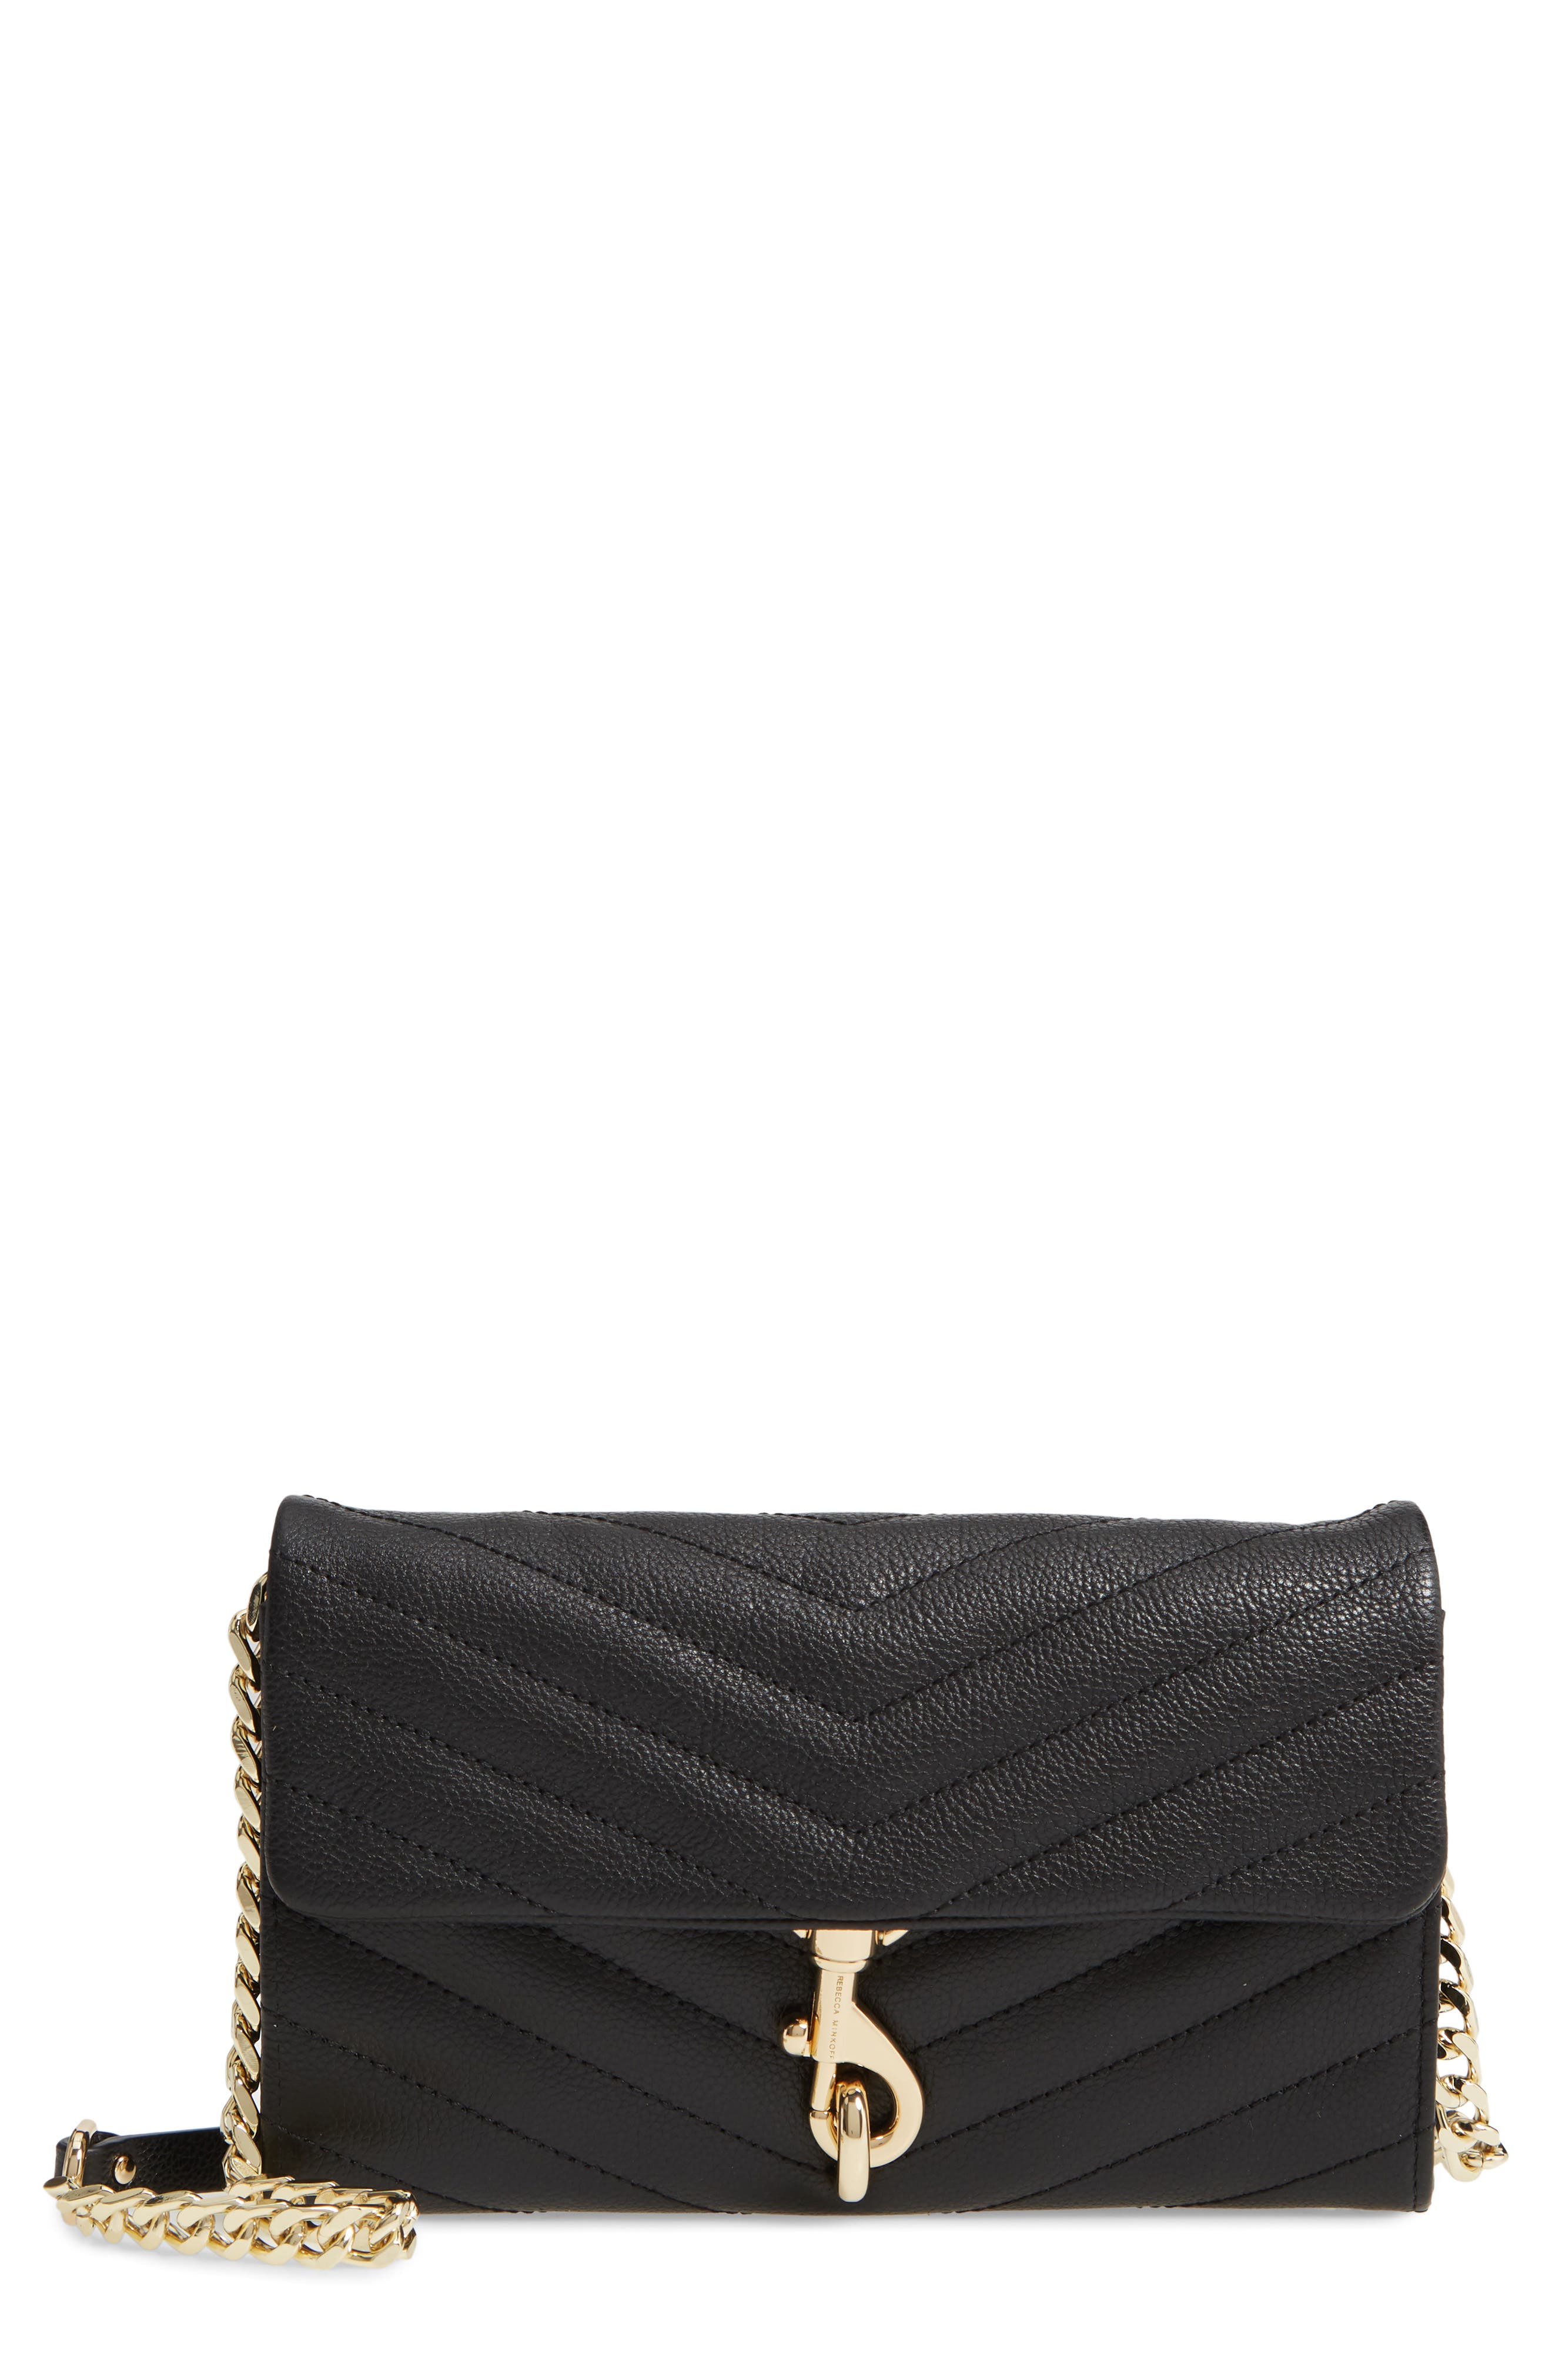 Rebecca Minkoff Edie Quilted Leather Wallet on a Chain in Black at Nordstrom